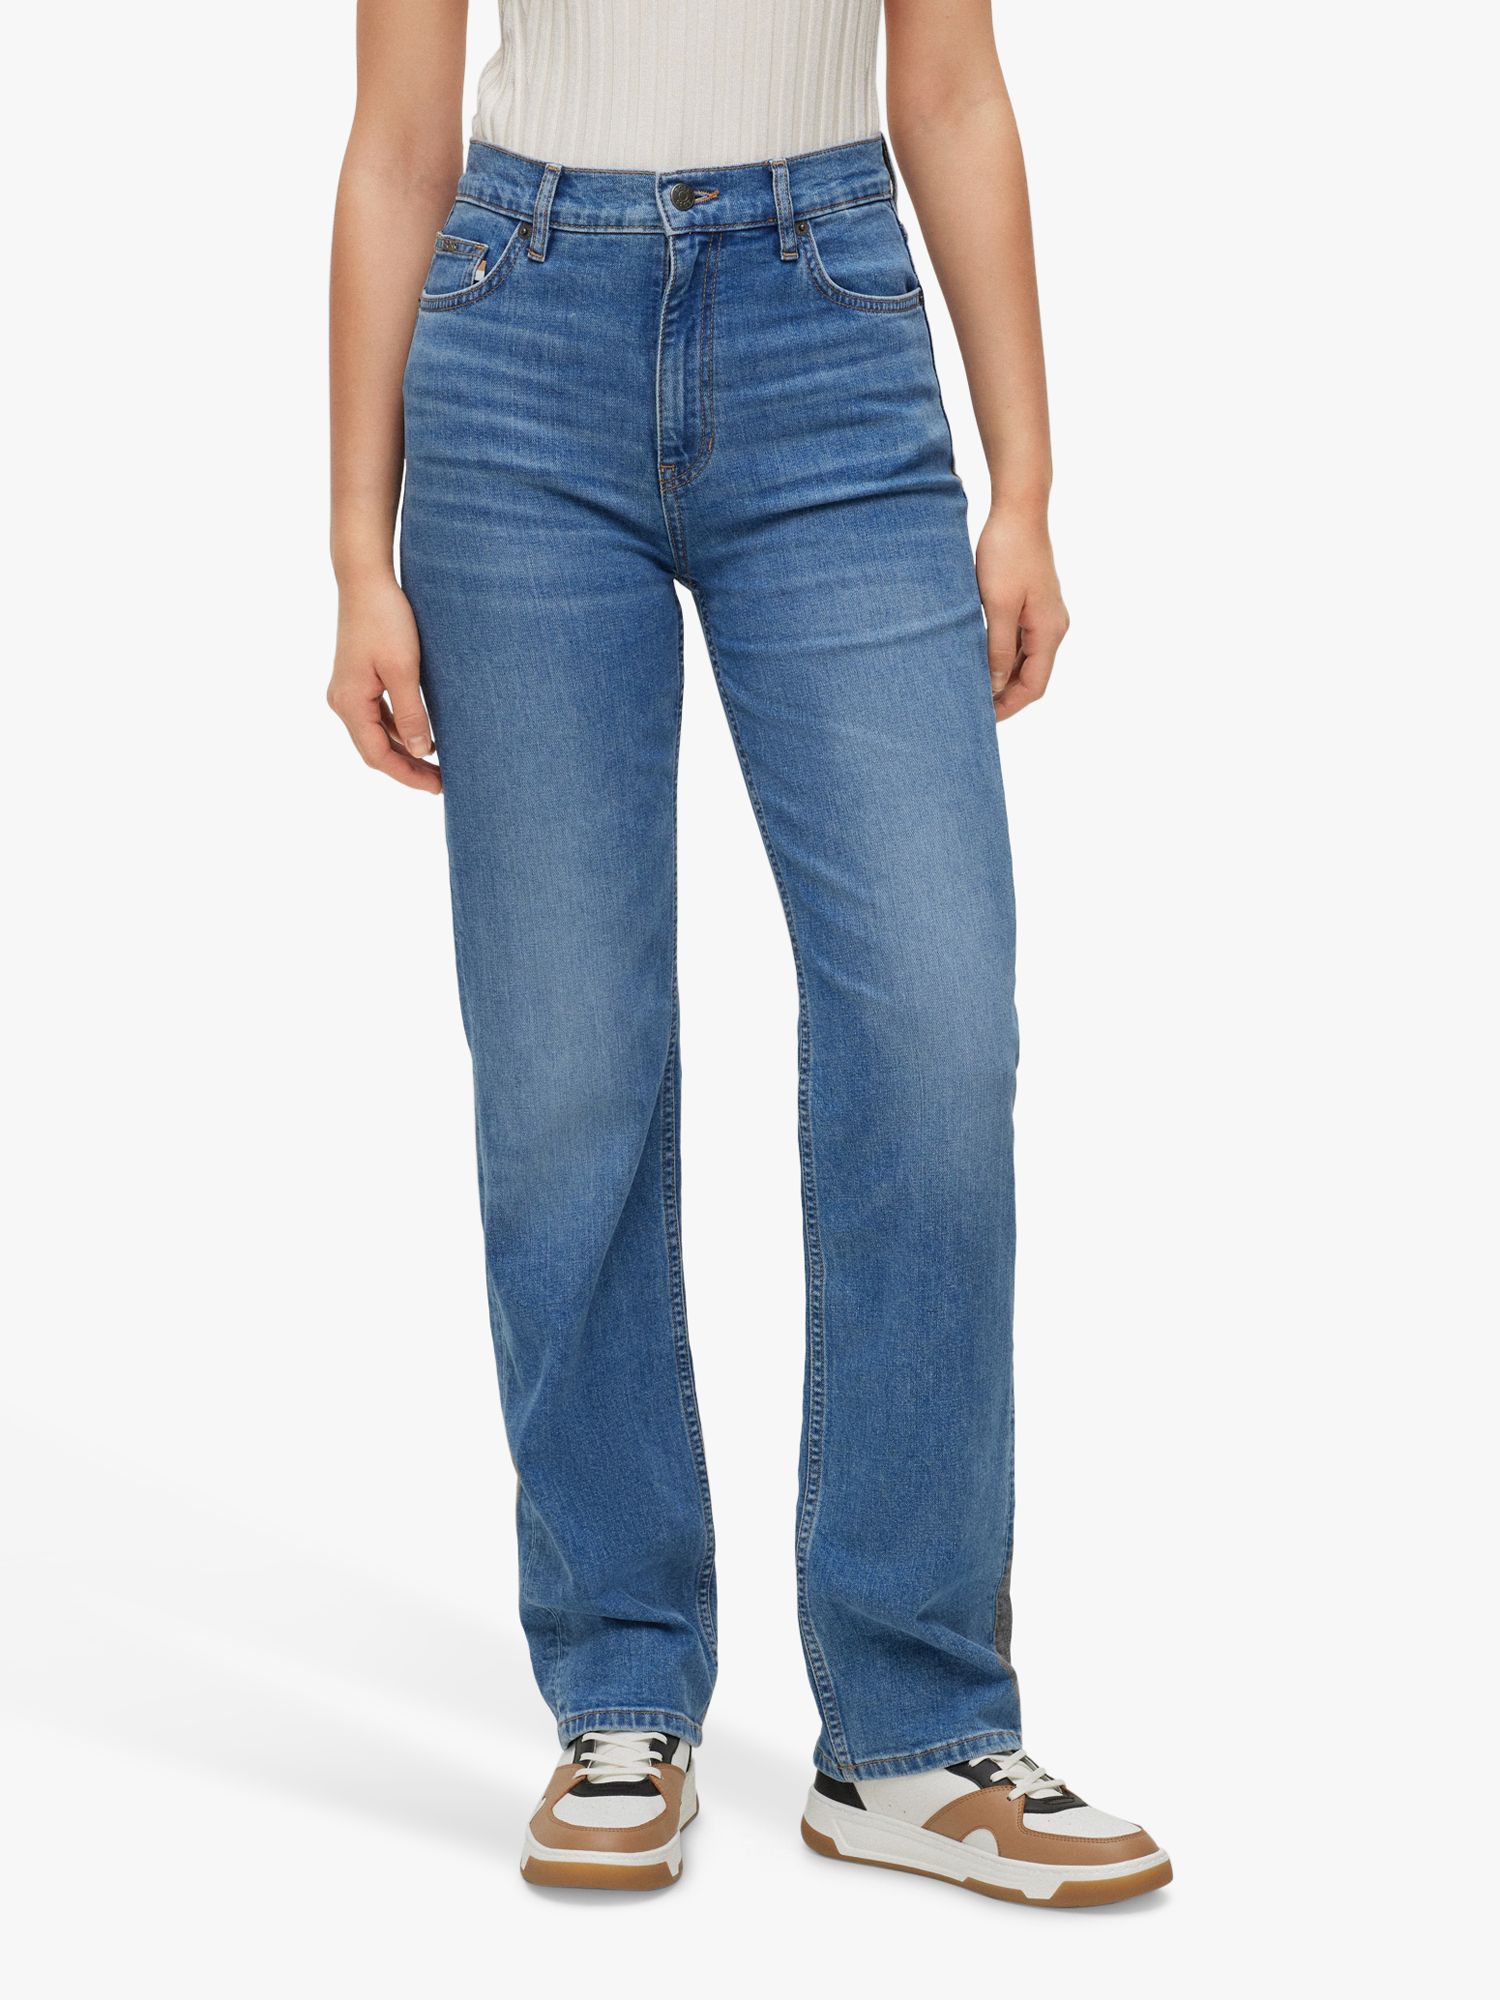 BOSS Ada Straight Fit Jeans, Bright Blue at John Lewis & Partners